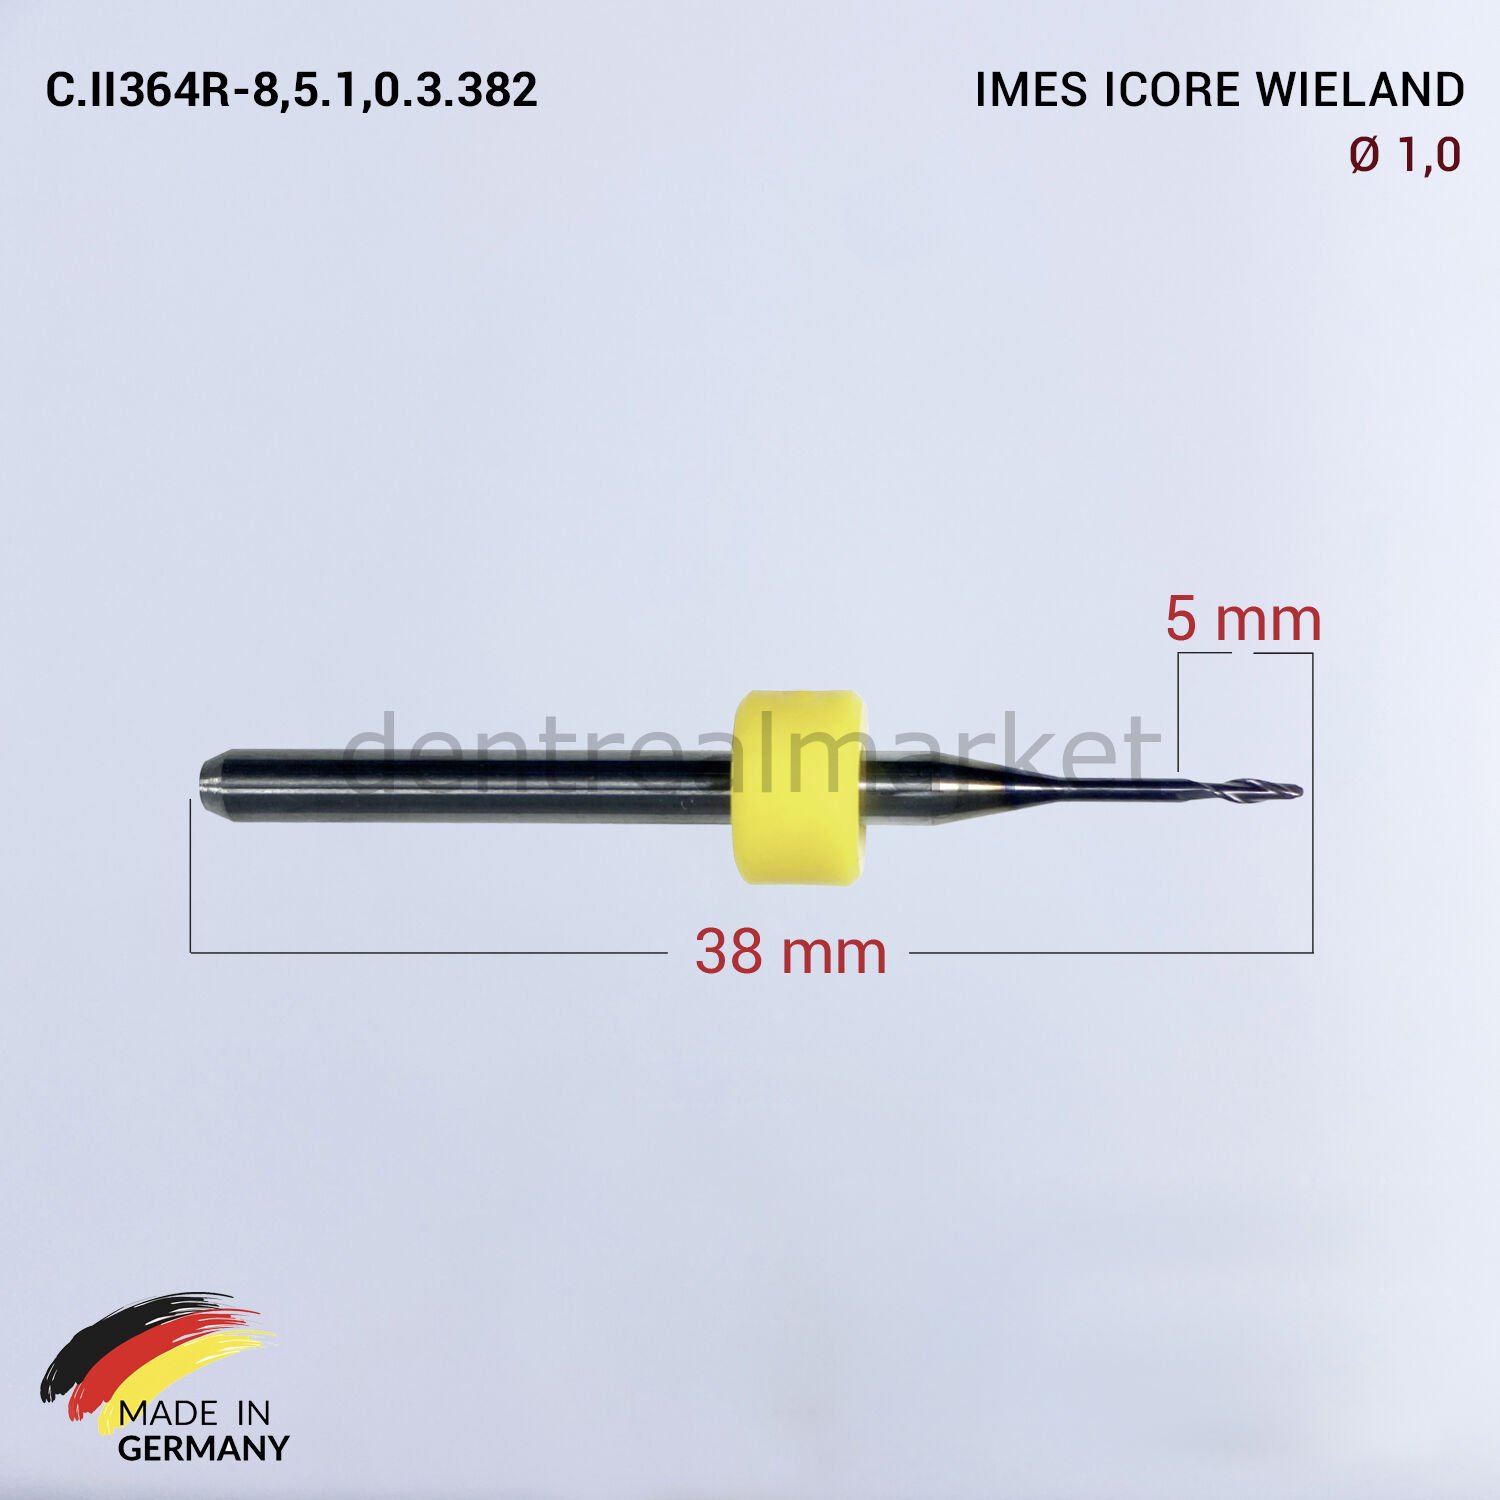 Imes Icore Wieland Cad Cam Drill 1,0 mm